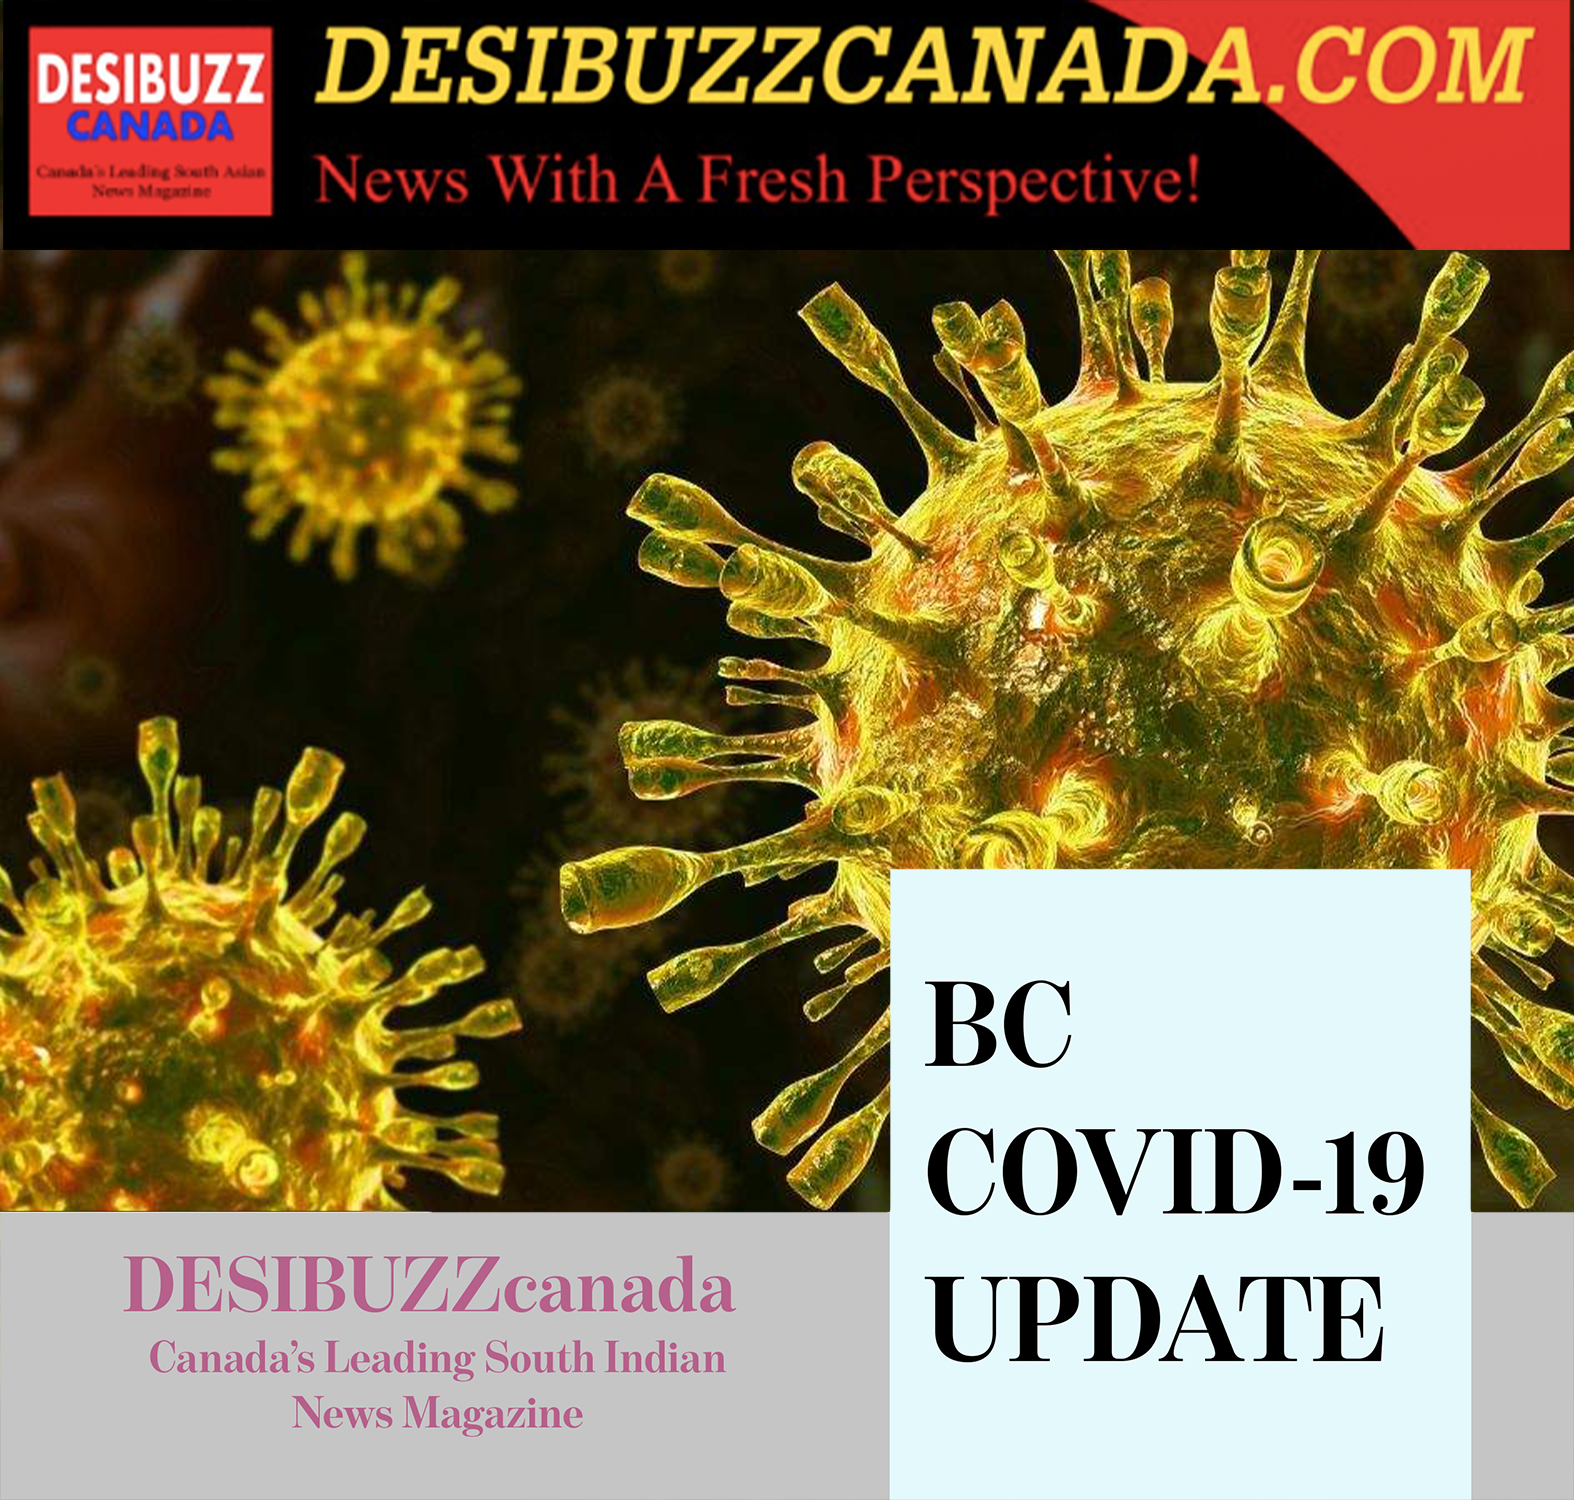 BC COVID-19 UPDATE: Cases Remain Low But Deaths Rise To 14 Wednesday